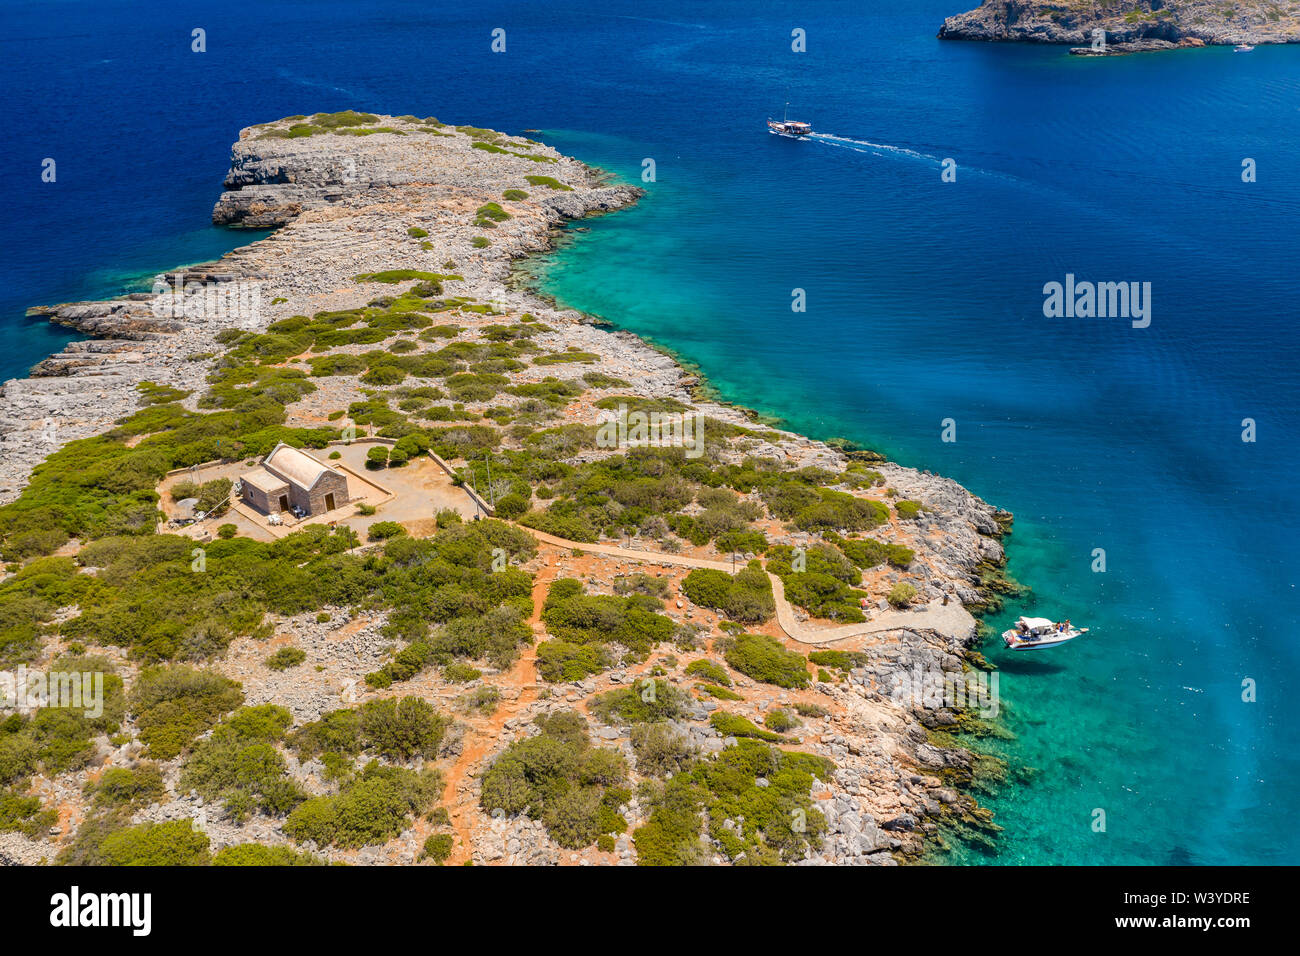 Aerial drone view of a warm, blue, clear ocean with dry coastline and boats (Kolokitha Island, Elounda, Crete) Stock Photo